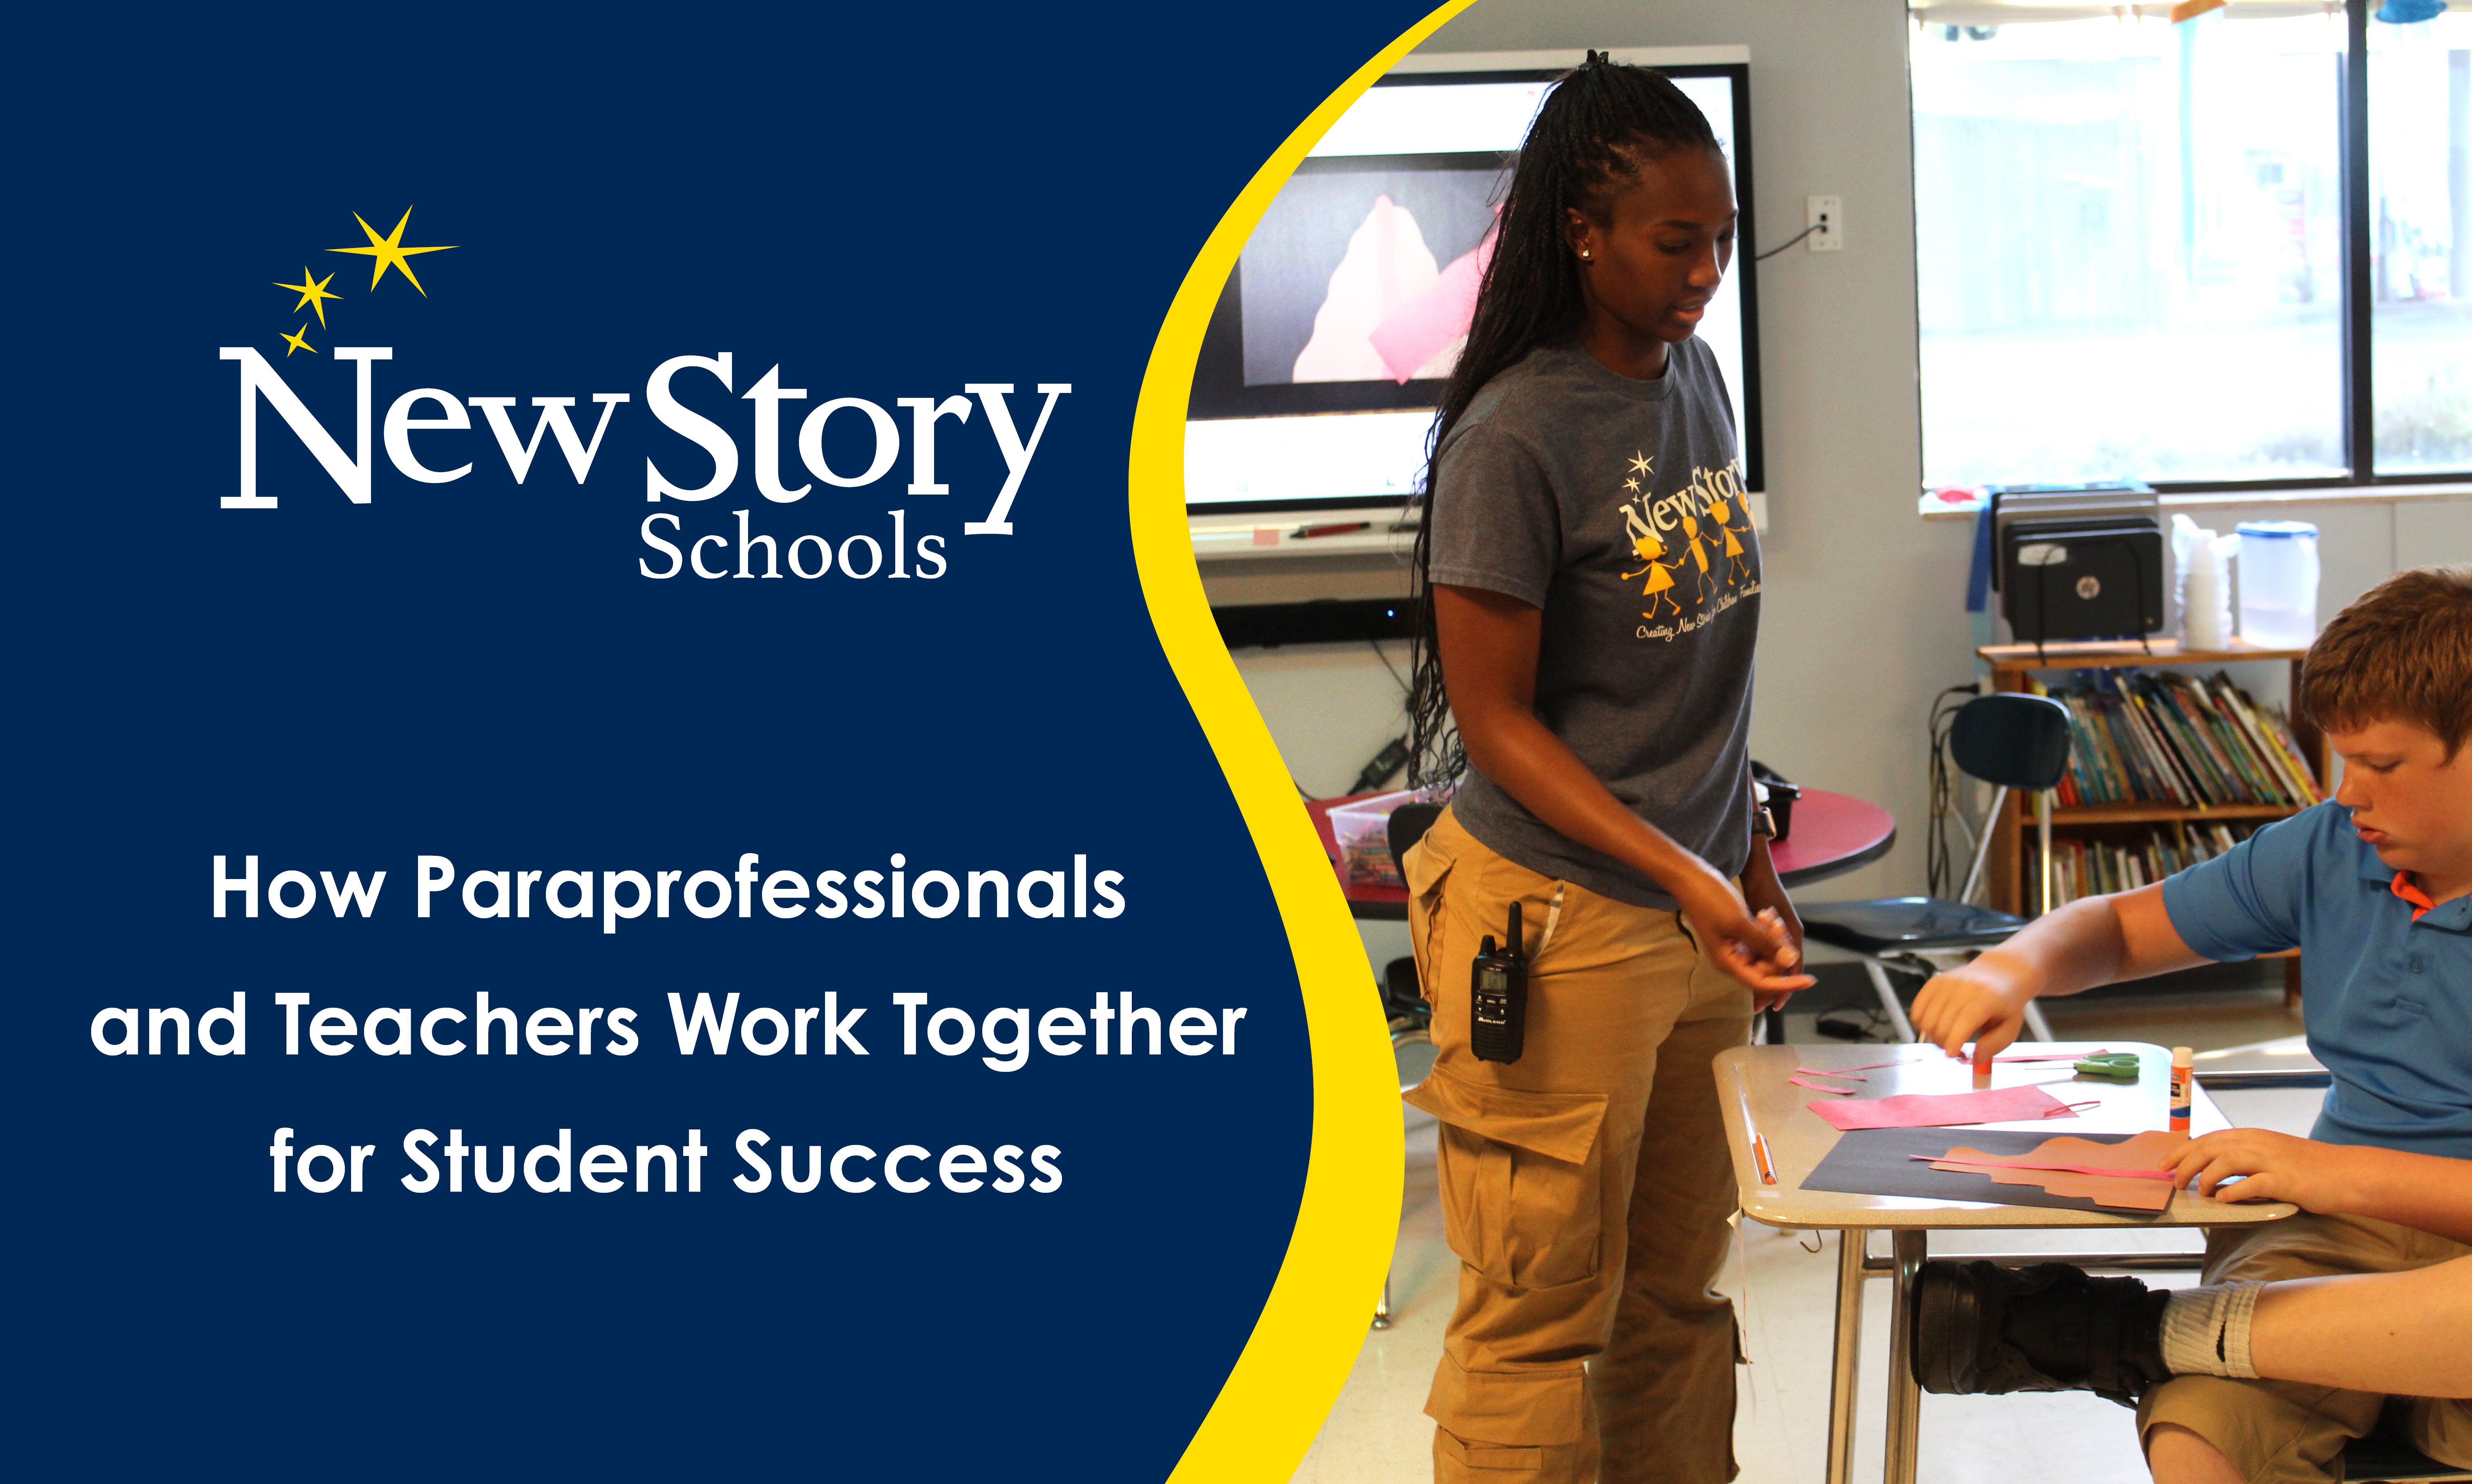 How Paraprofessionals and Teachers Work Together for Student Success